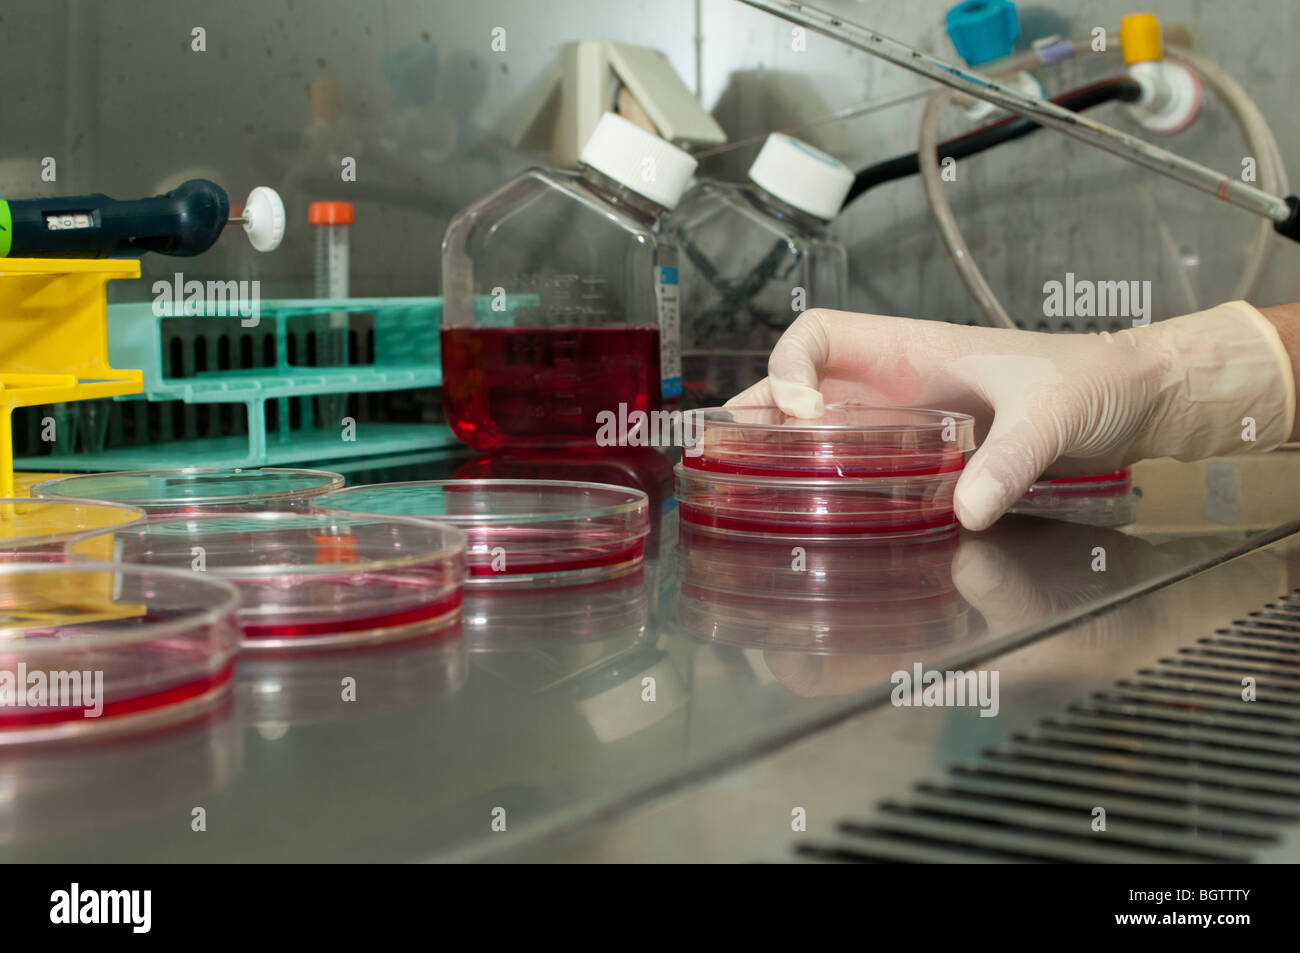 Microbiology Laboratory Cell cultures. Gloved hand holding a pipette over petri dishes containing cell cultures. Stock Photo